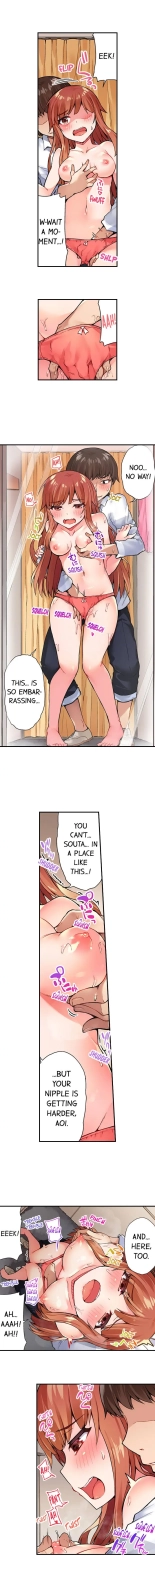 Traditional Job of Washing Girls' Body Ch. 1-189 : page 215